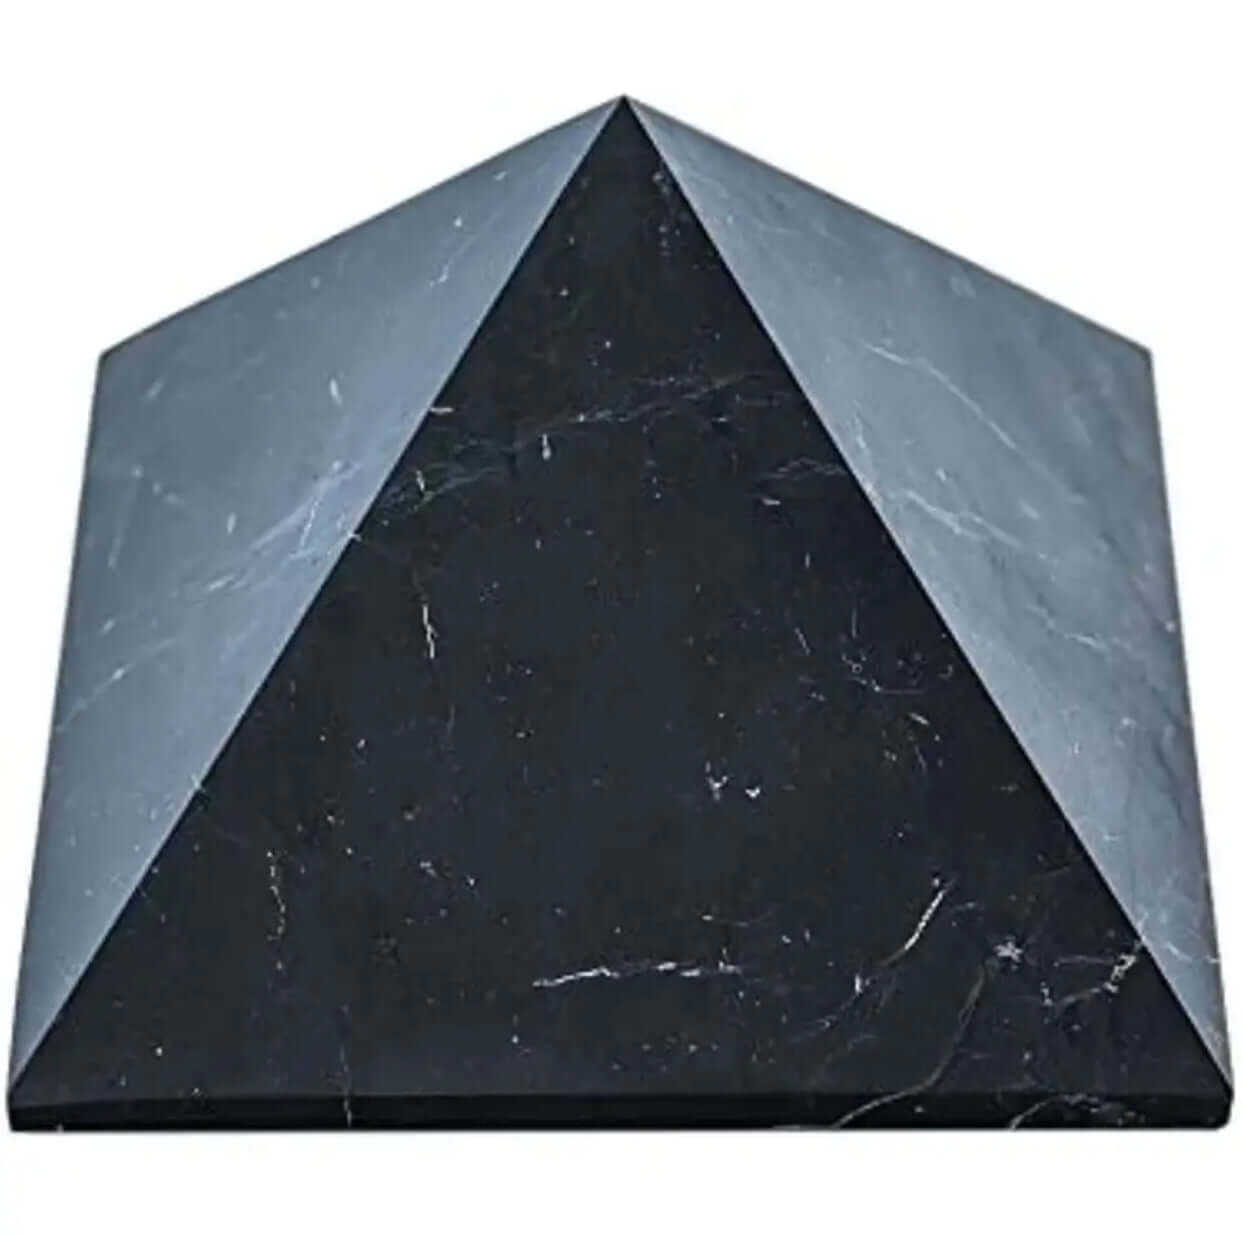 Real Shungite Pyramid - Source of Energy and Protection